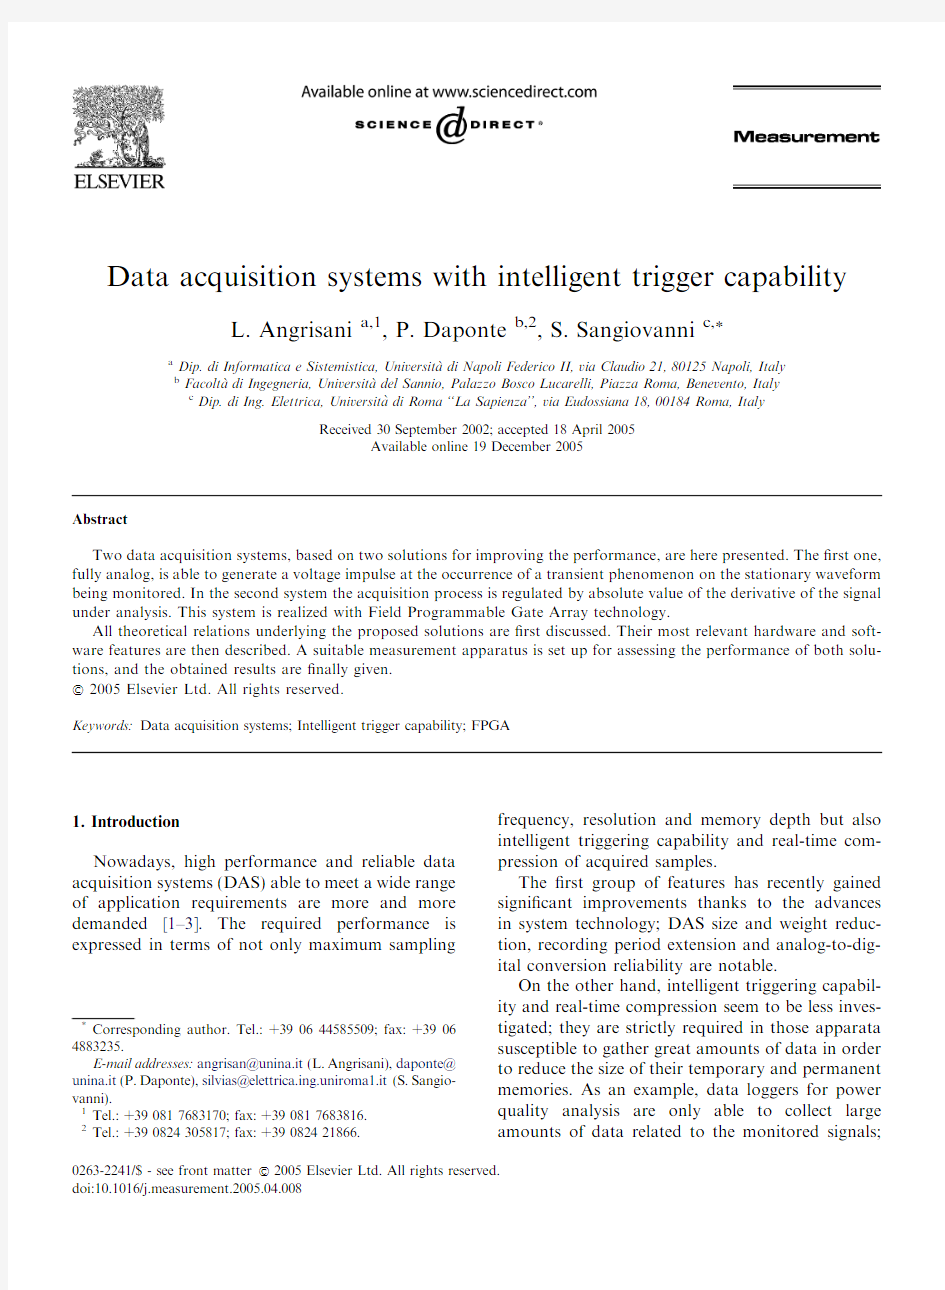 Data acquisition systems with intelligent trigger capability